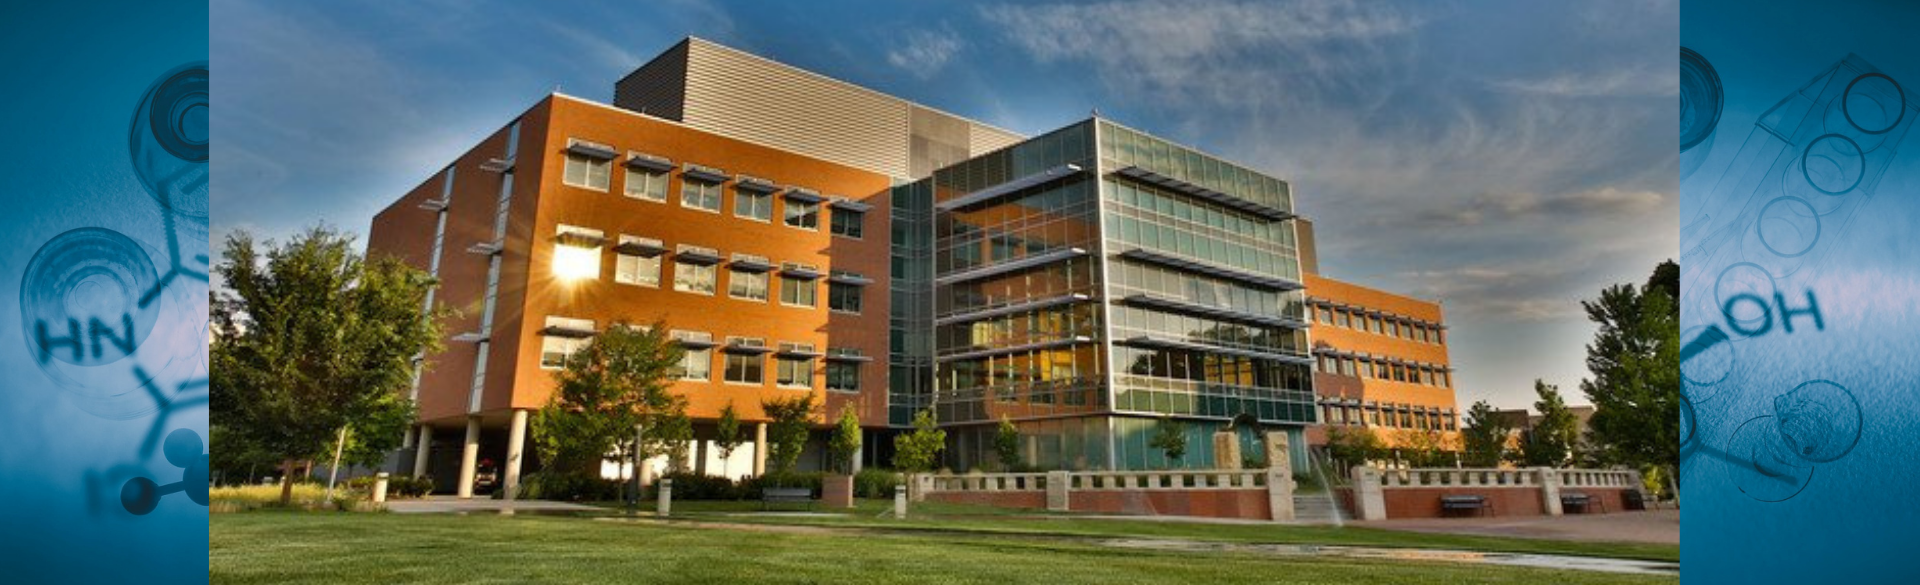 Image of Skaggs School of Pharmacy and Pharmaceutical Sciences building